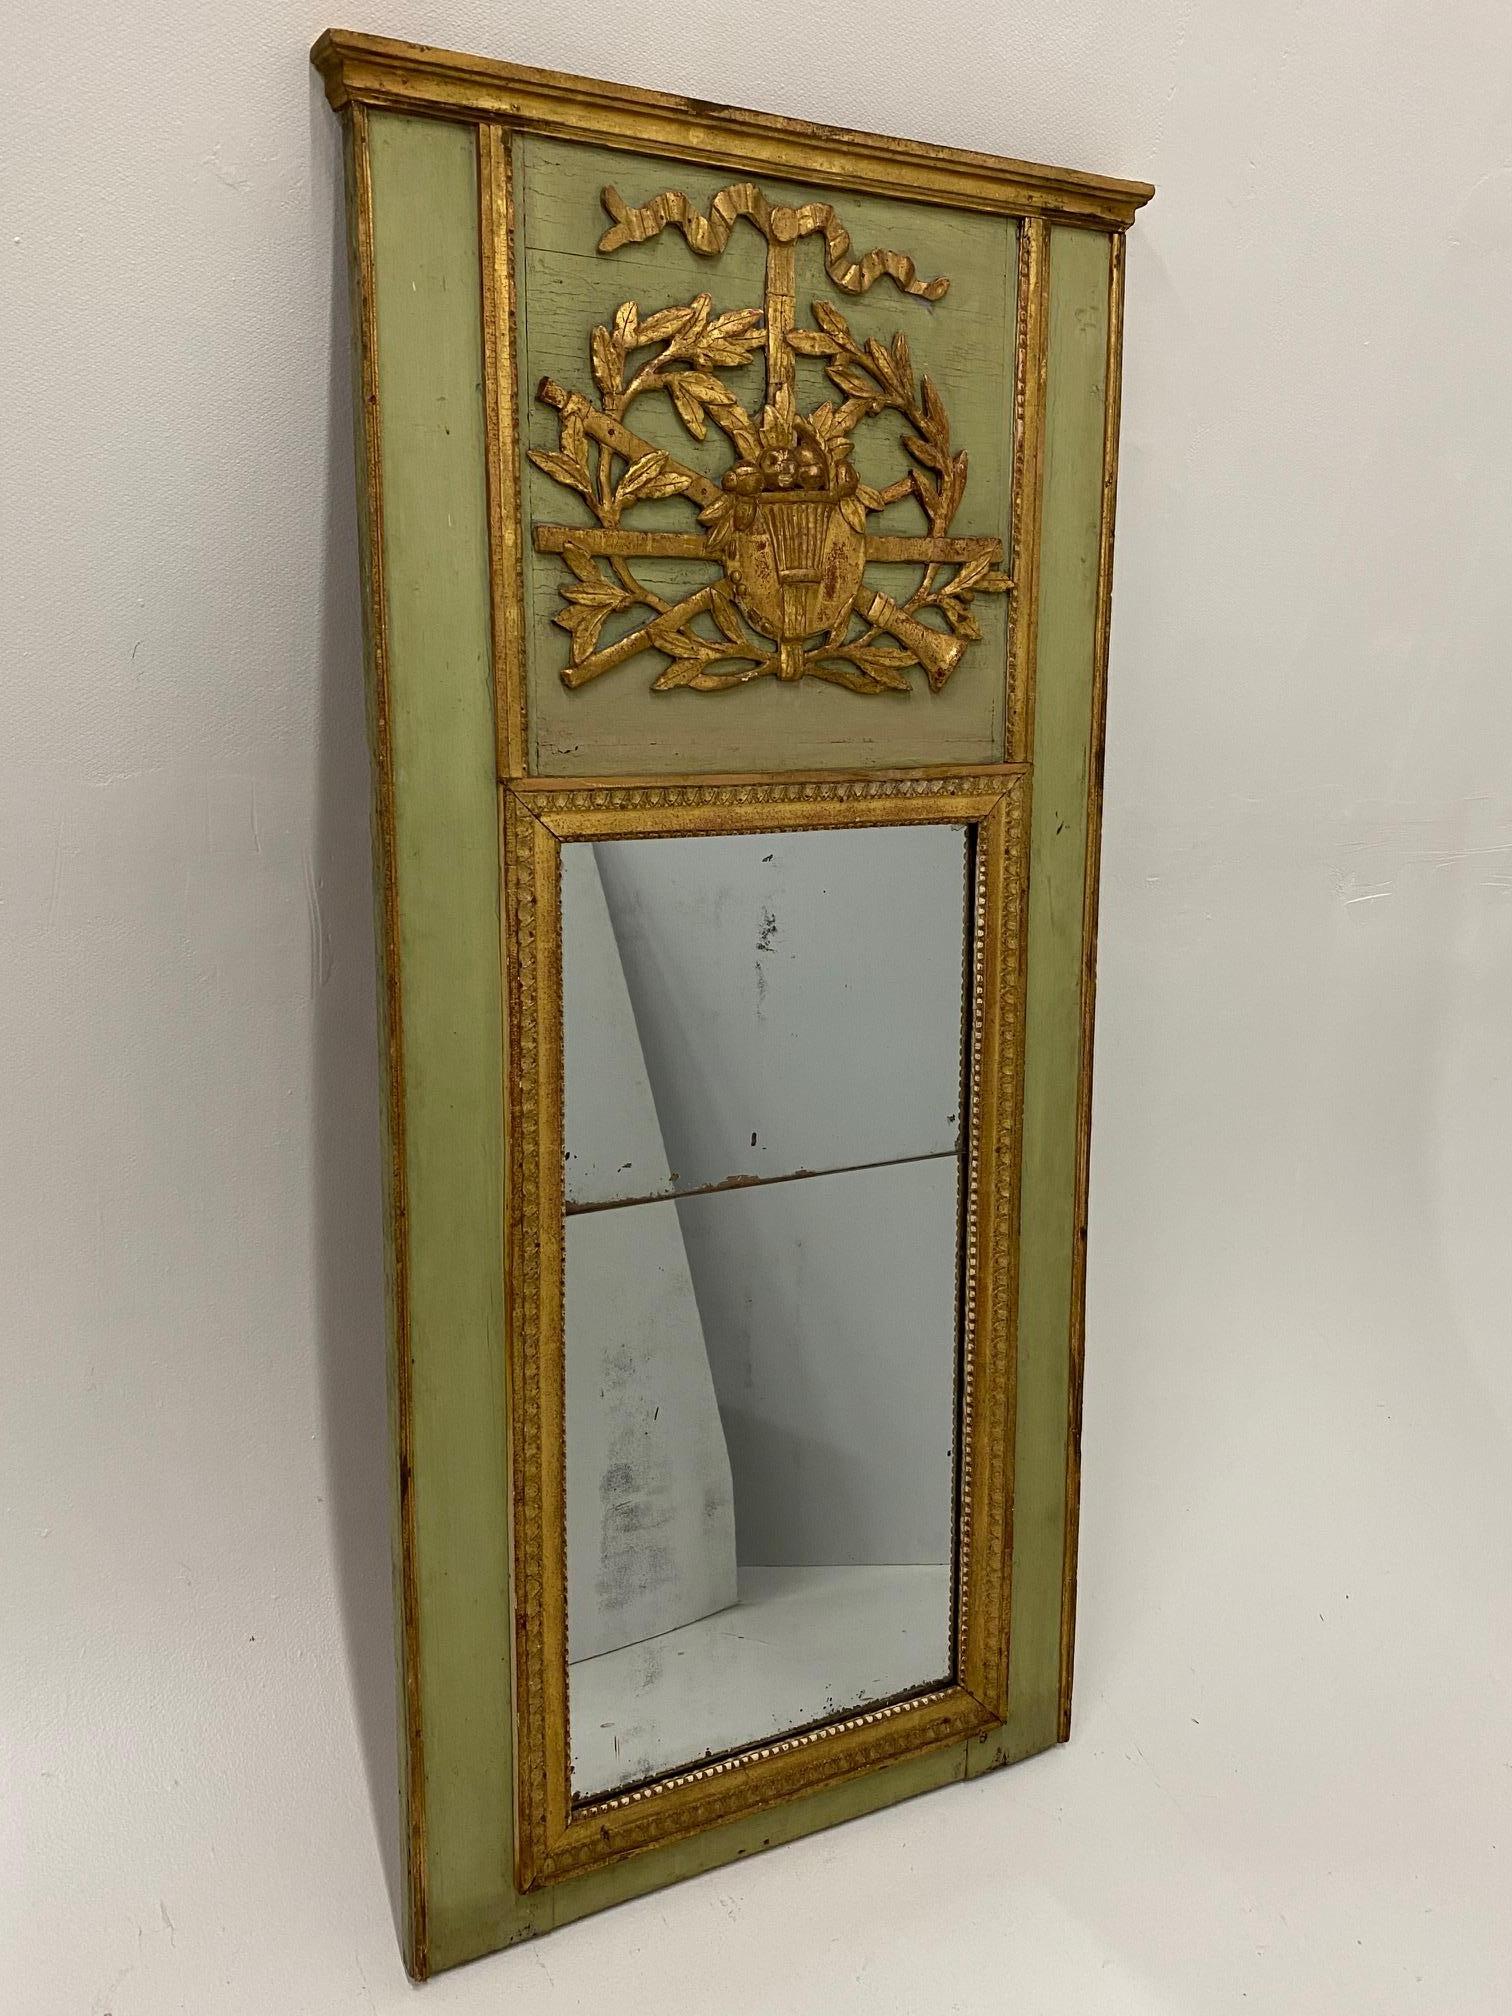 A beautiful 18th century painted vertical giltwood trumeau mirror having a gorgeous soft green painted frame with gilt musical themed embellishments. Original mirror in very good condition, has the Classic two pieces with horizontal seam.